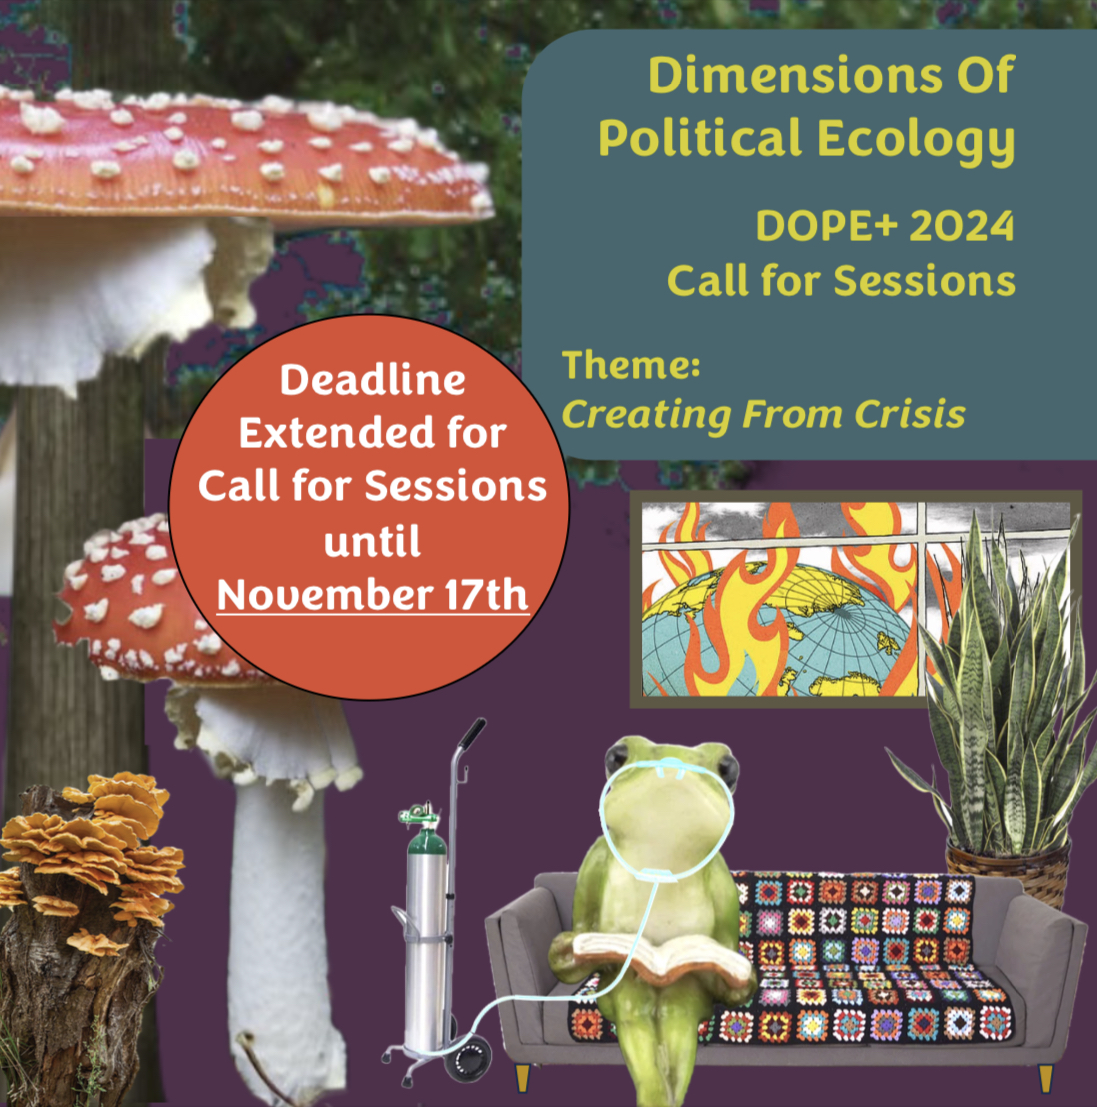 The call for sessions for DOPE+ 2024 is now extended by two weeks up until November 17, 2023. The call for abstracts will come out soon, so stay tuned for that also!